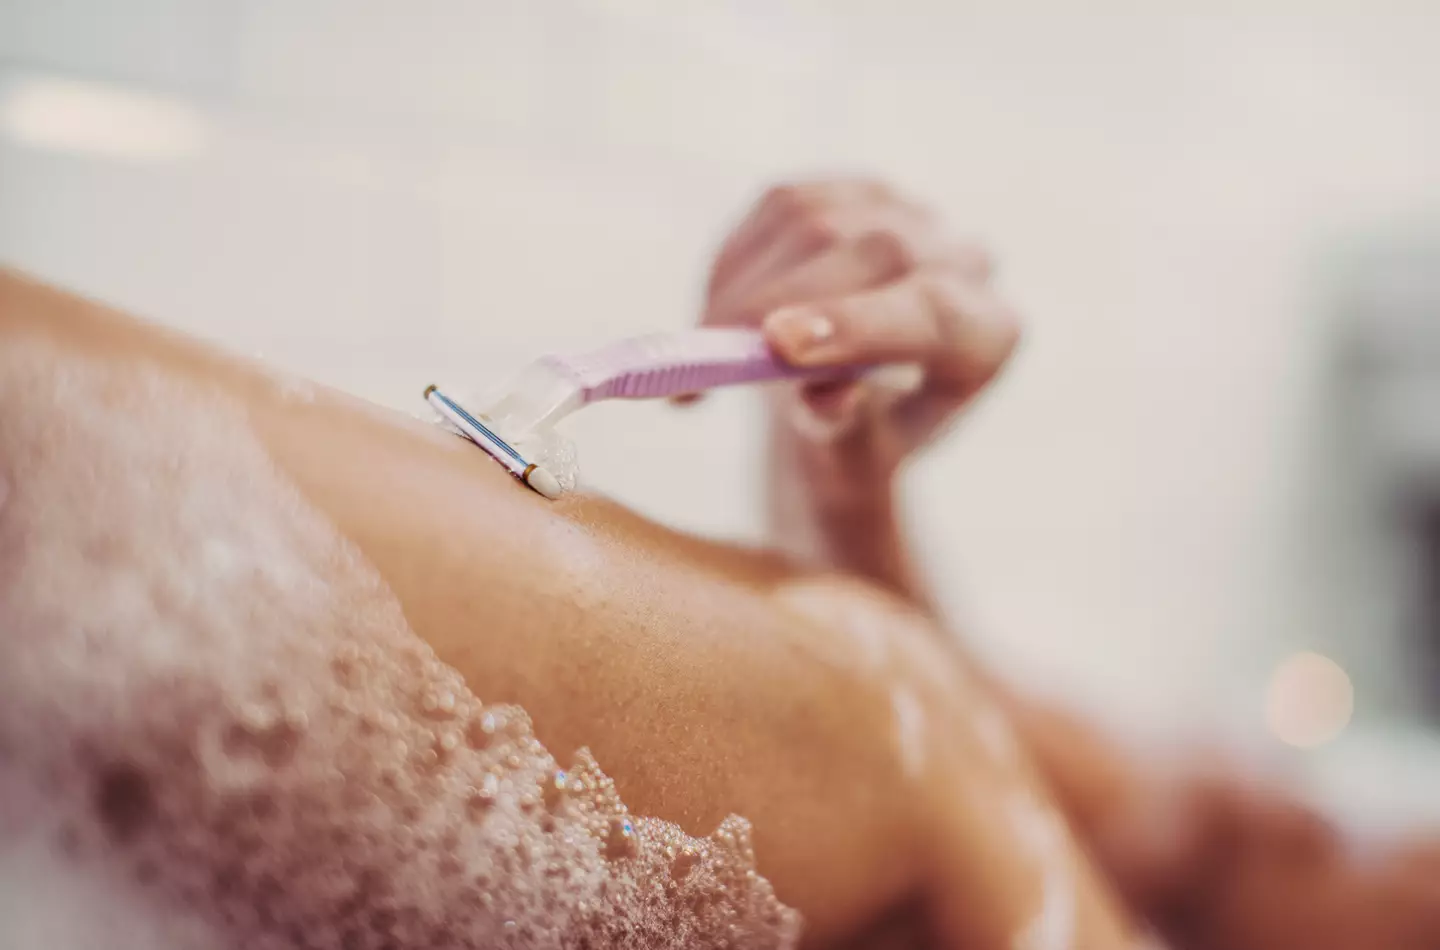 It is recommended to take care when shaving.